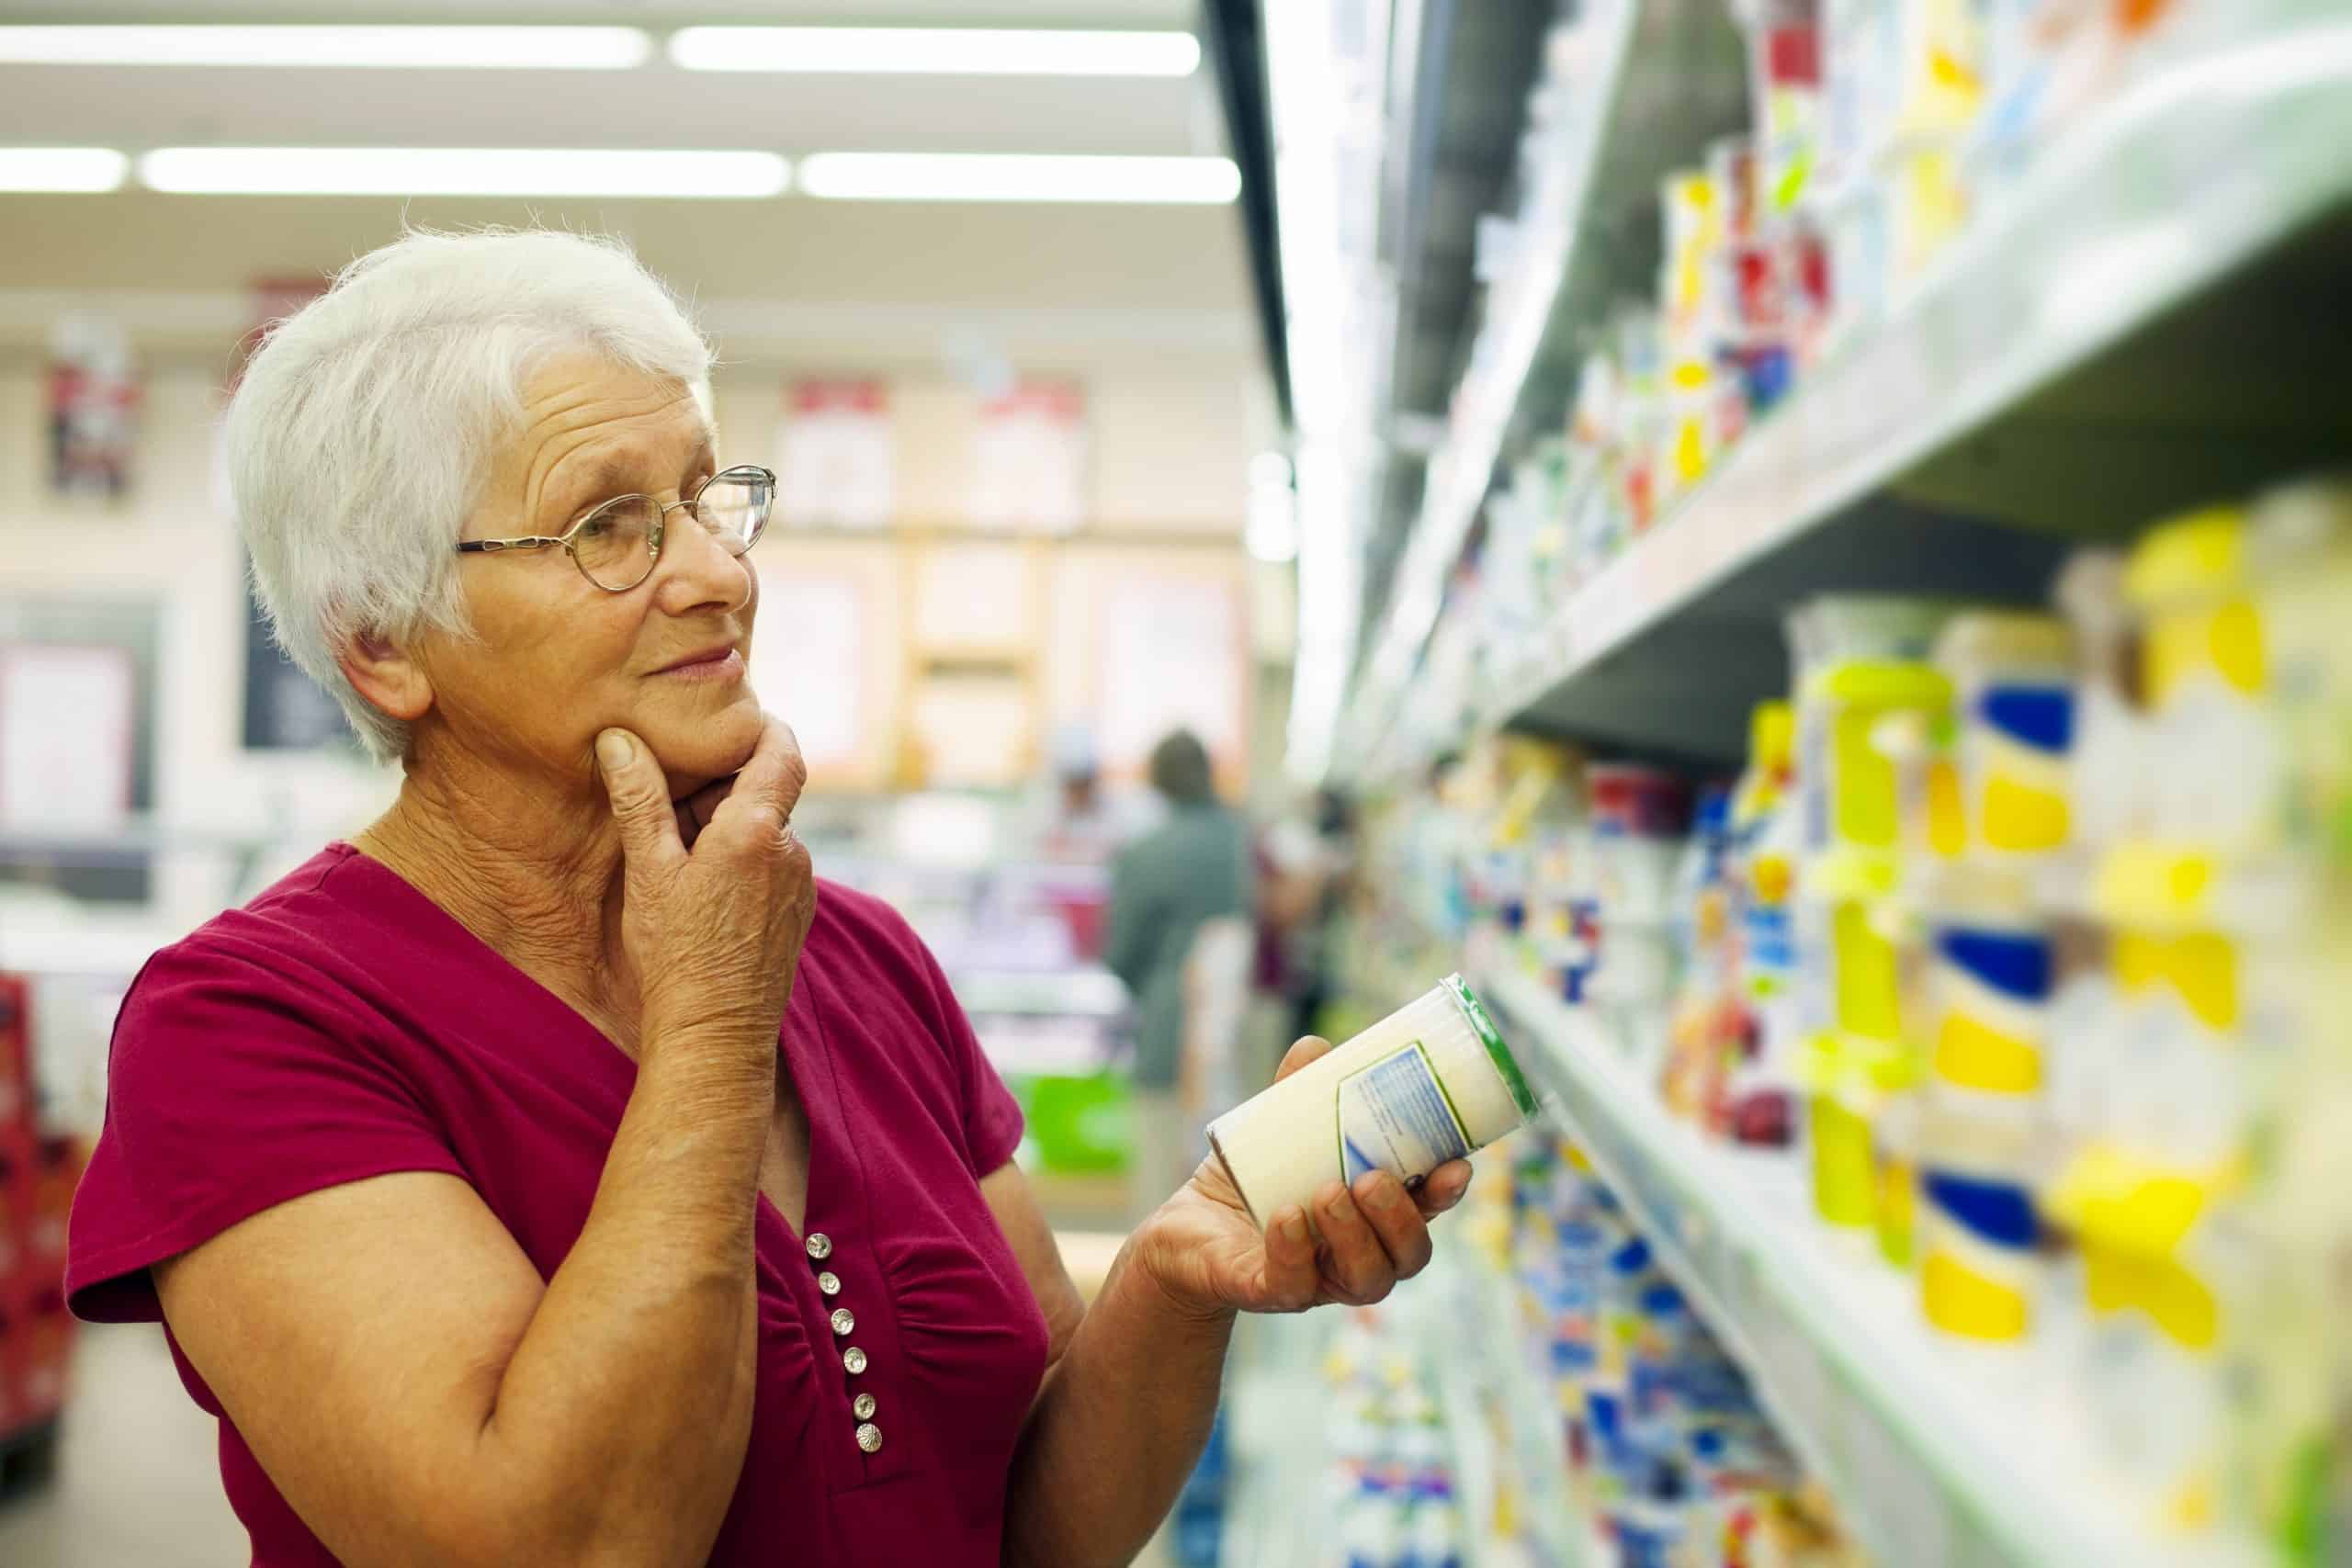 Woman looking at cans on shelf in grocery store